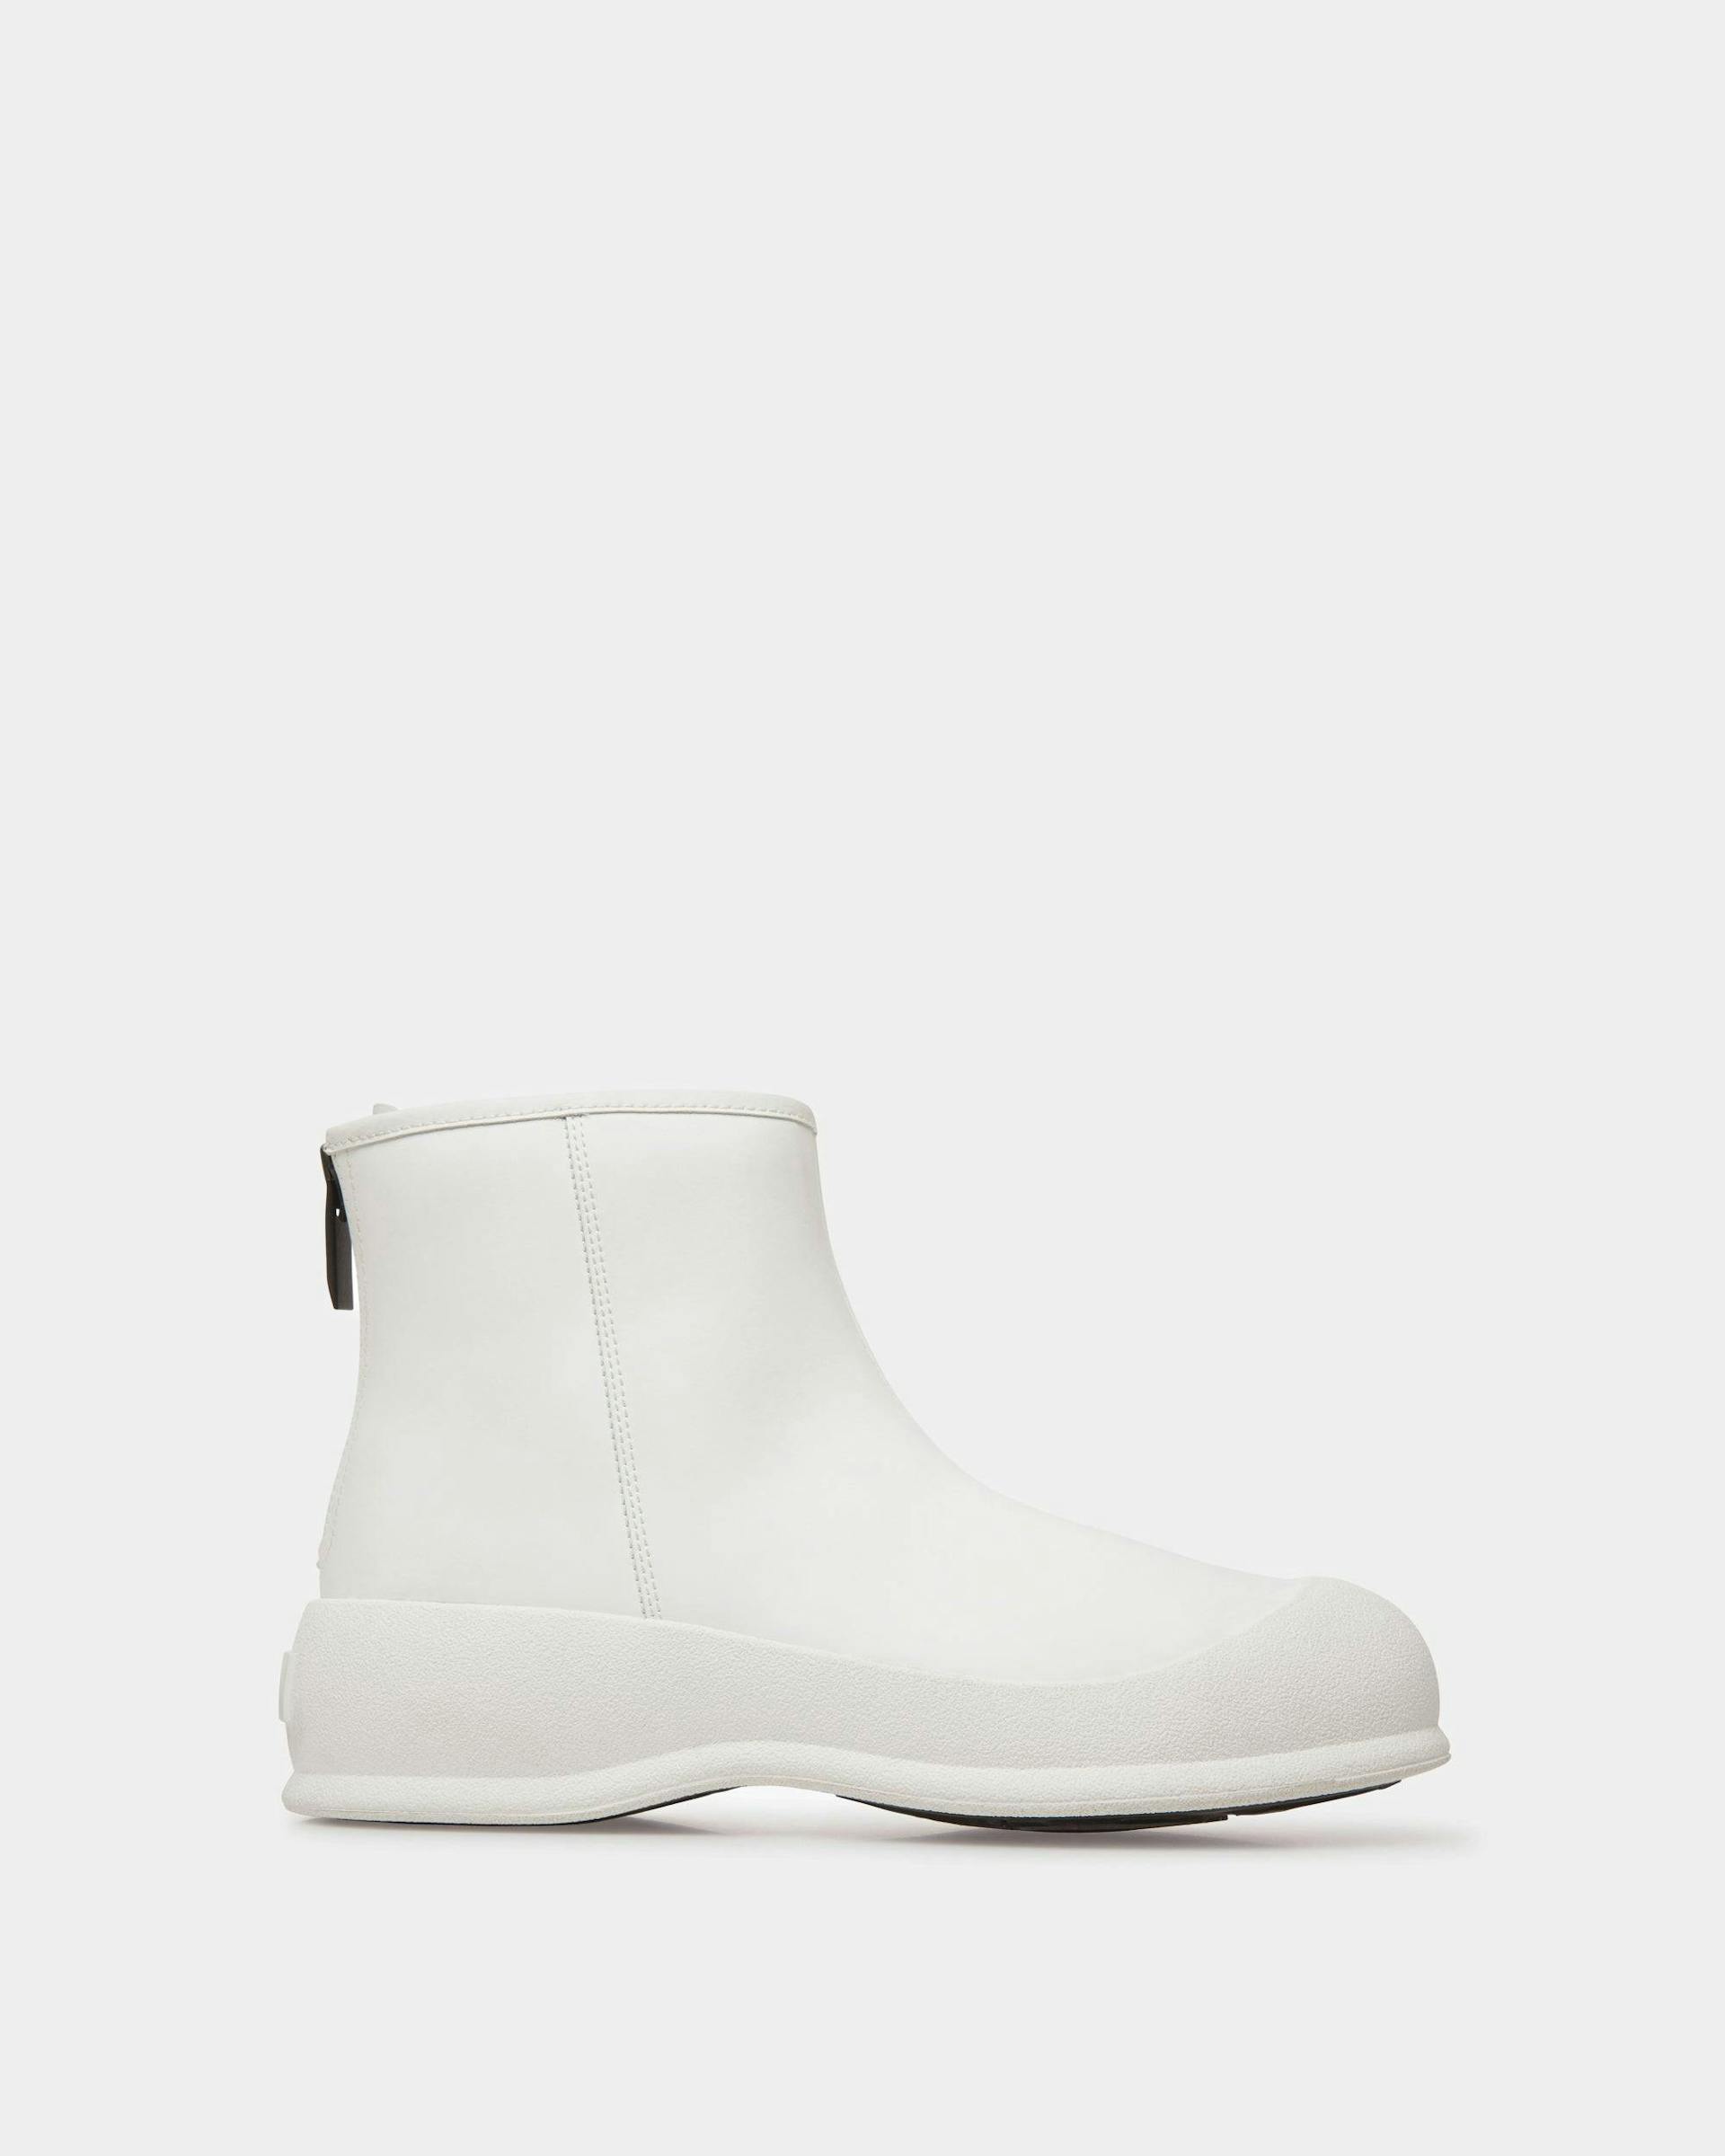 Frei Boots In White Rubber-coated Leather - Women's - Bally - 01